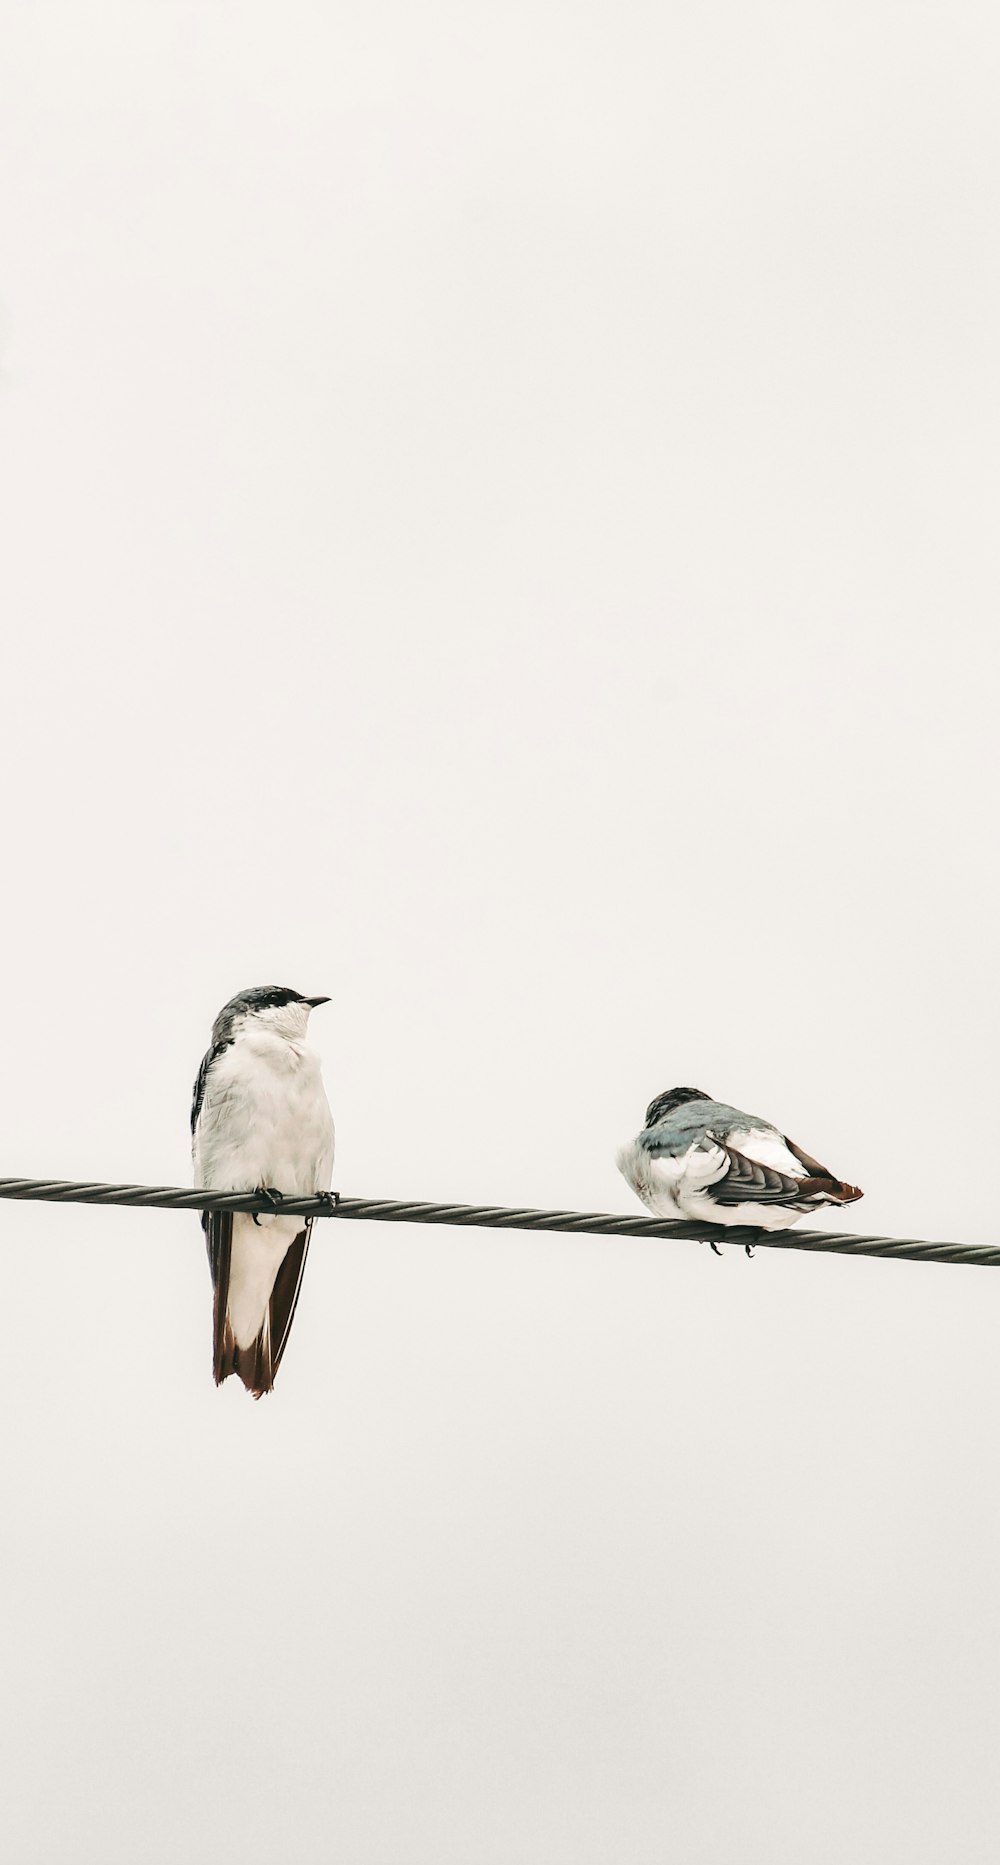 two birds are sitting on a power line